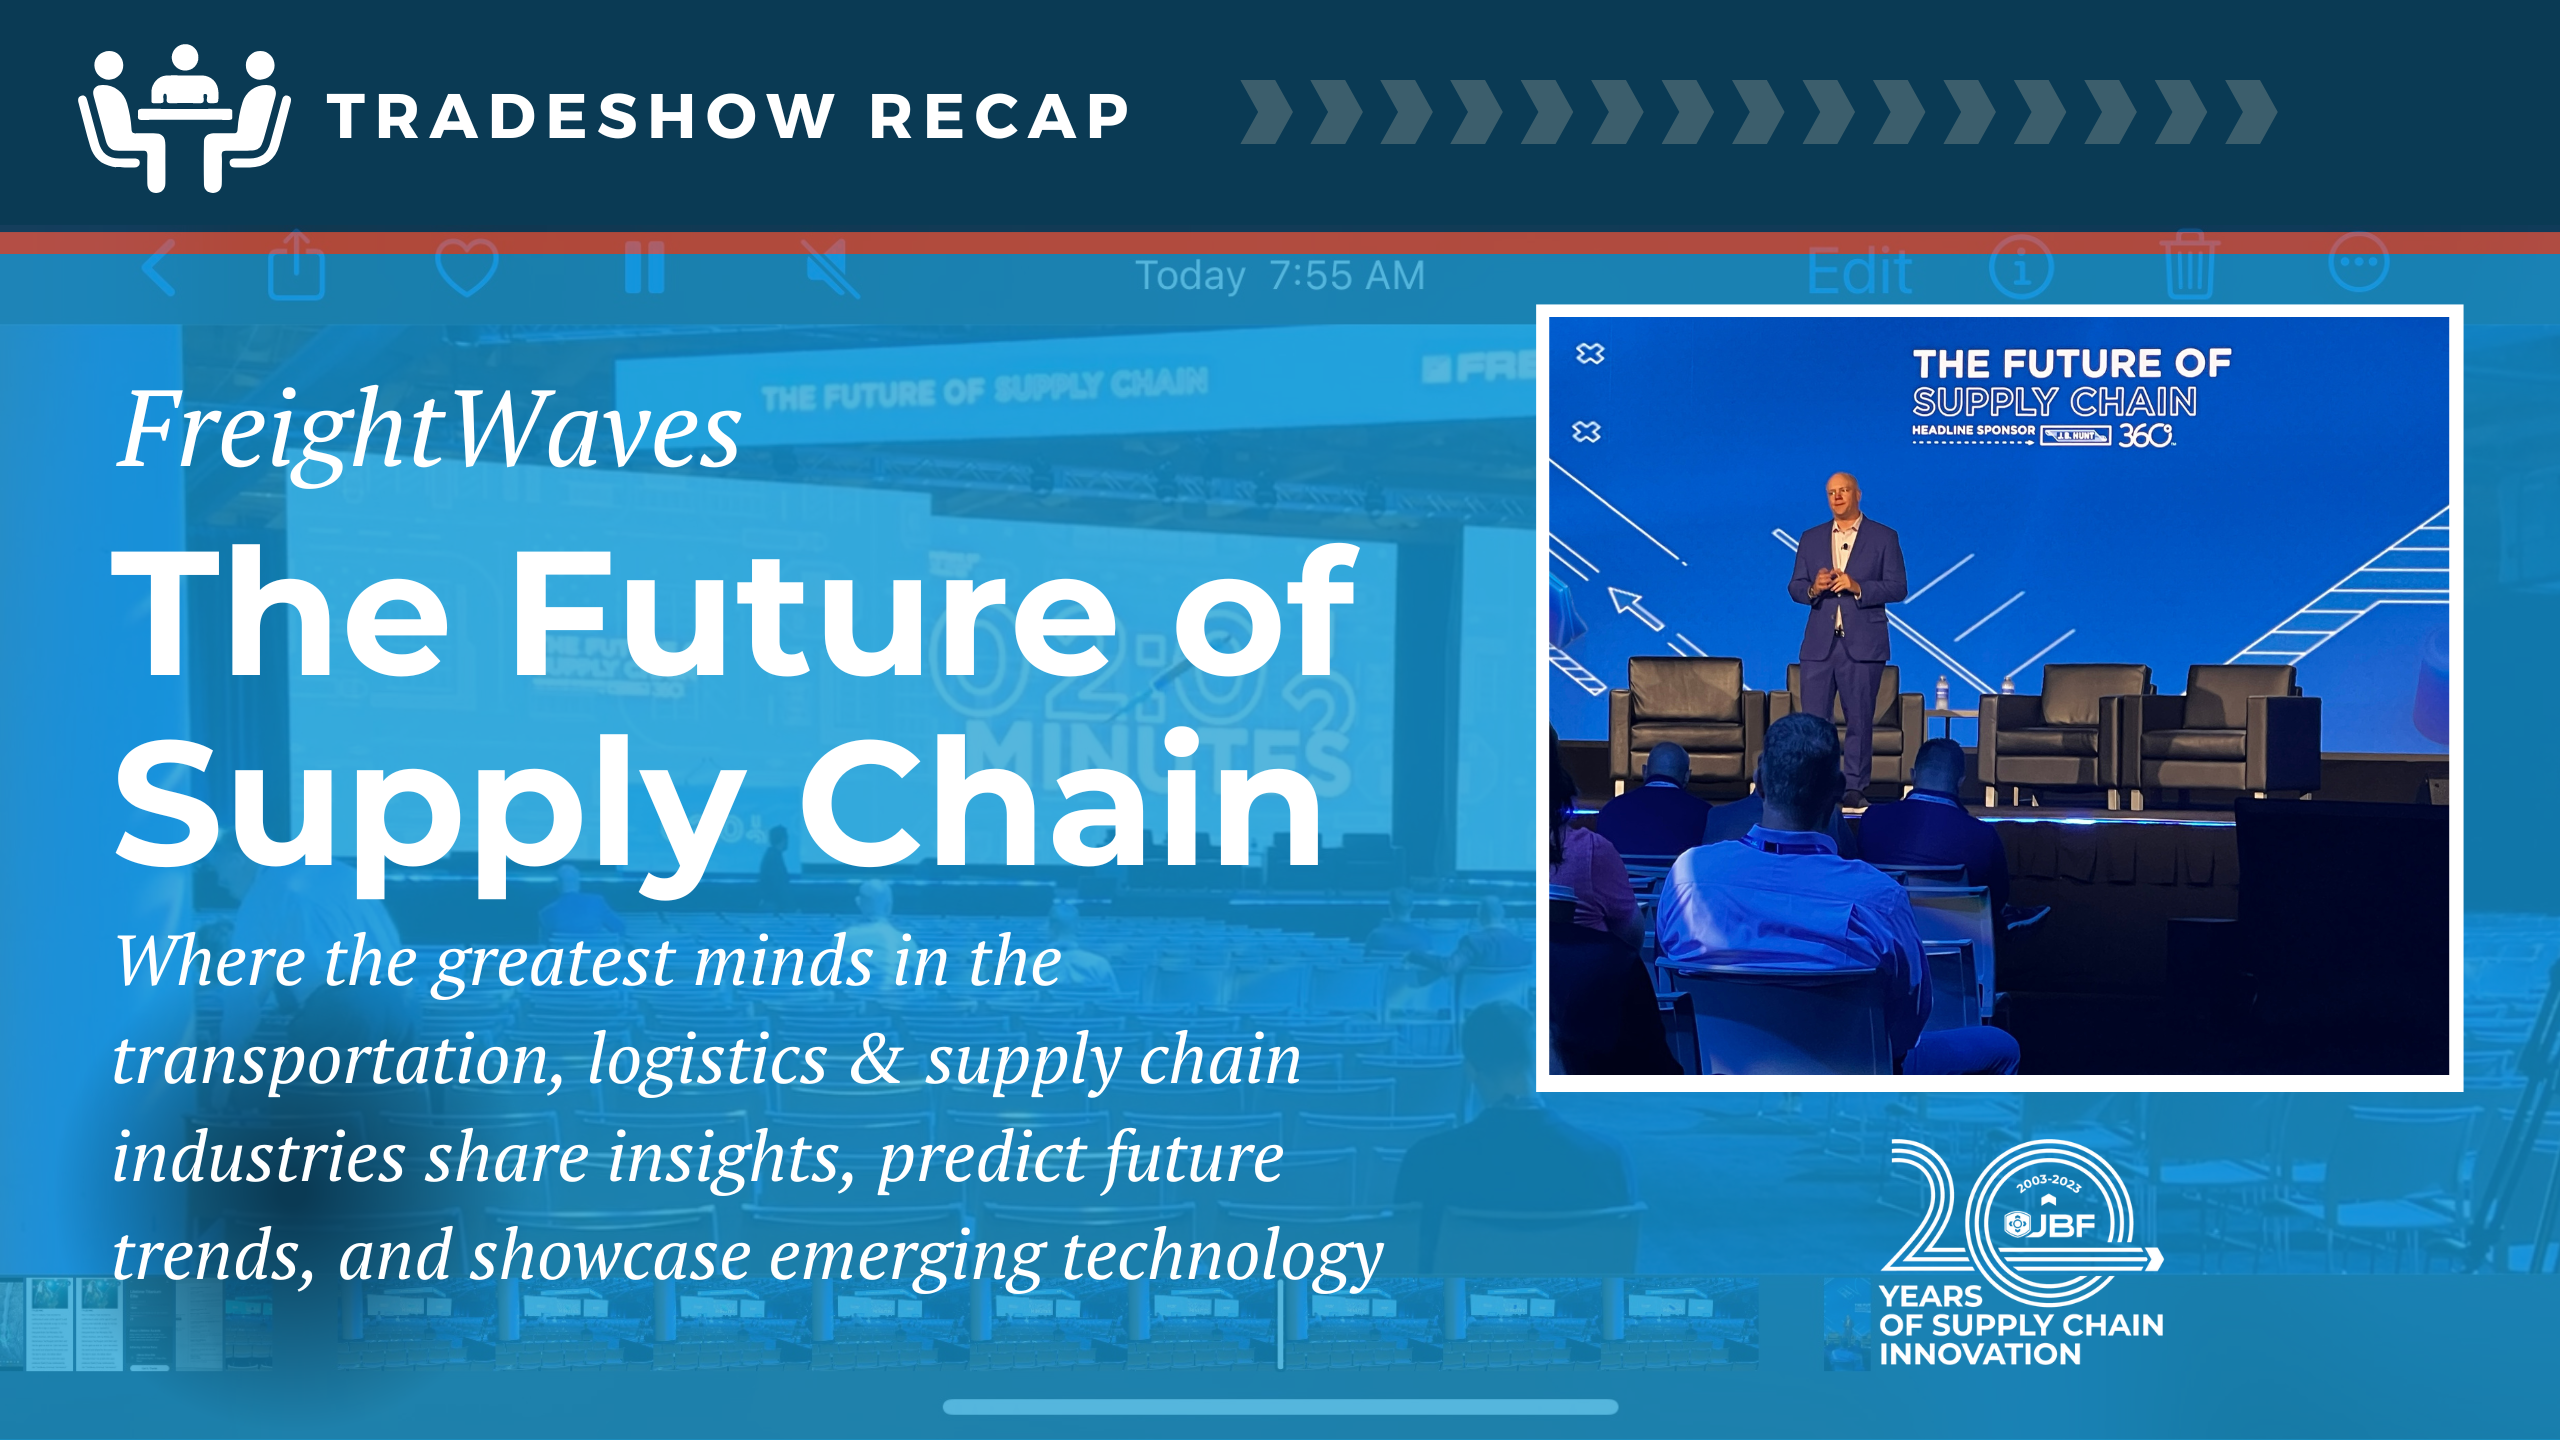 FreightWaves: The Future of Supply Chain